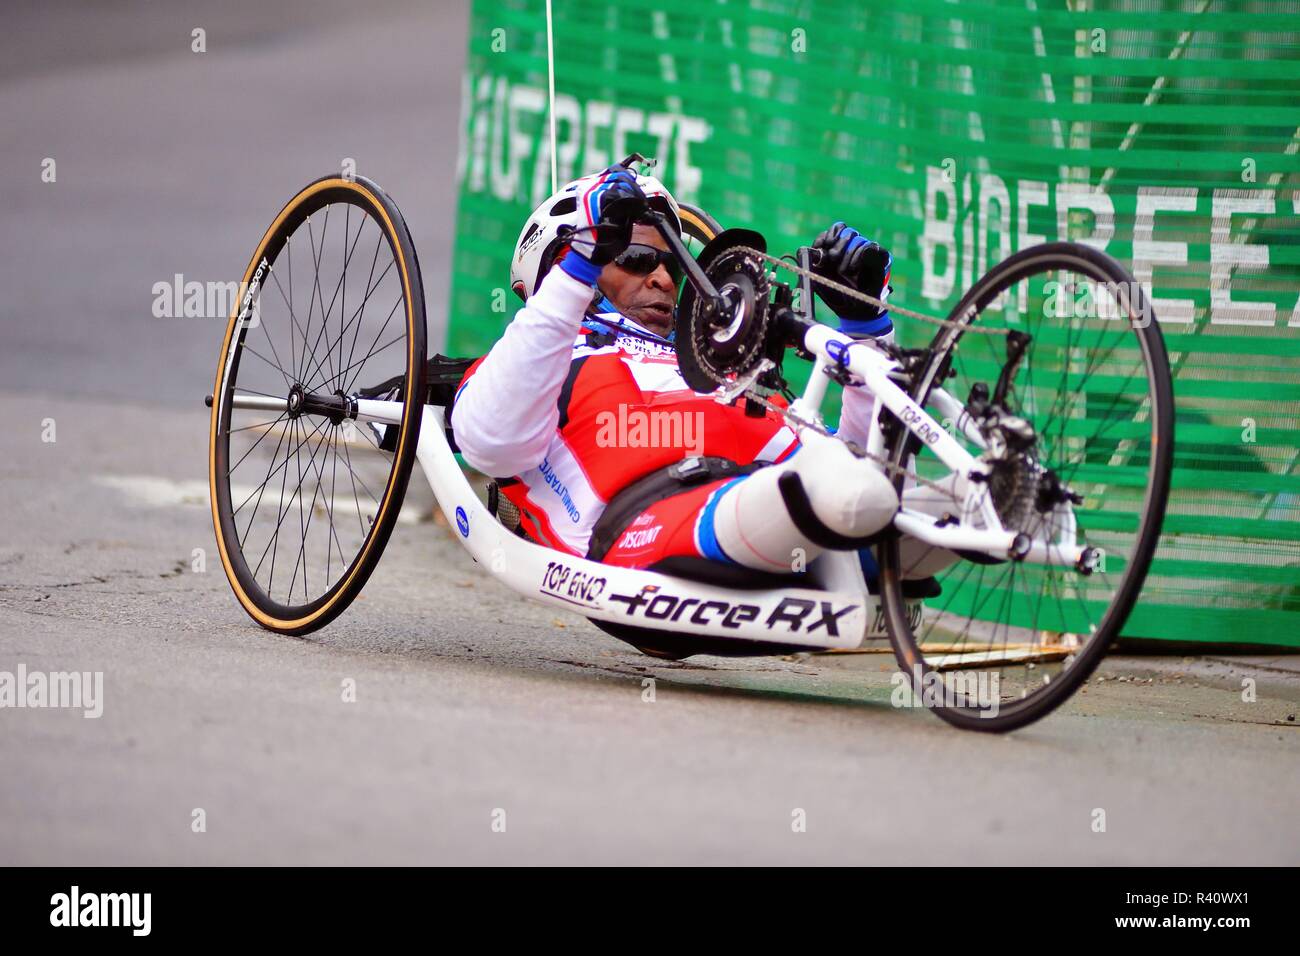 Chicago, Illinois, USA. A handcycle athlete negotiating through a curve about eight miles into the 2018 Chicago Marathon course. Stock Photo